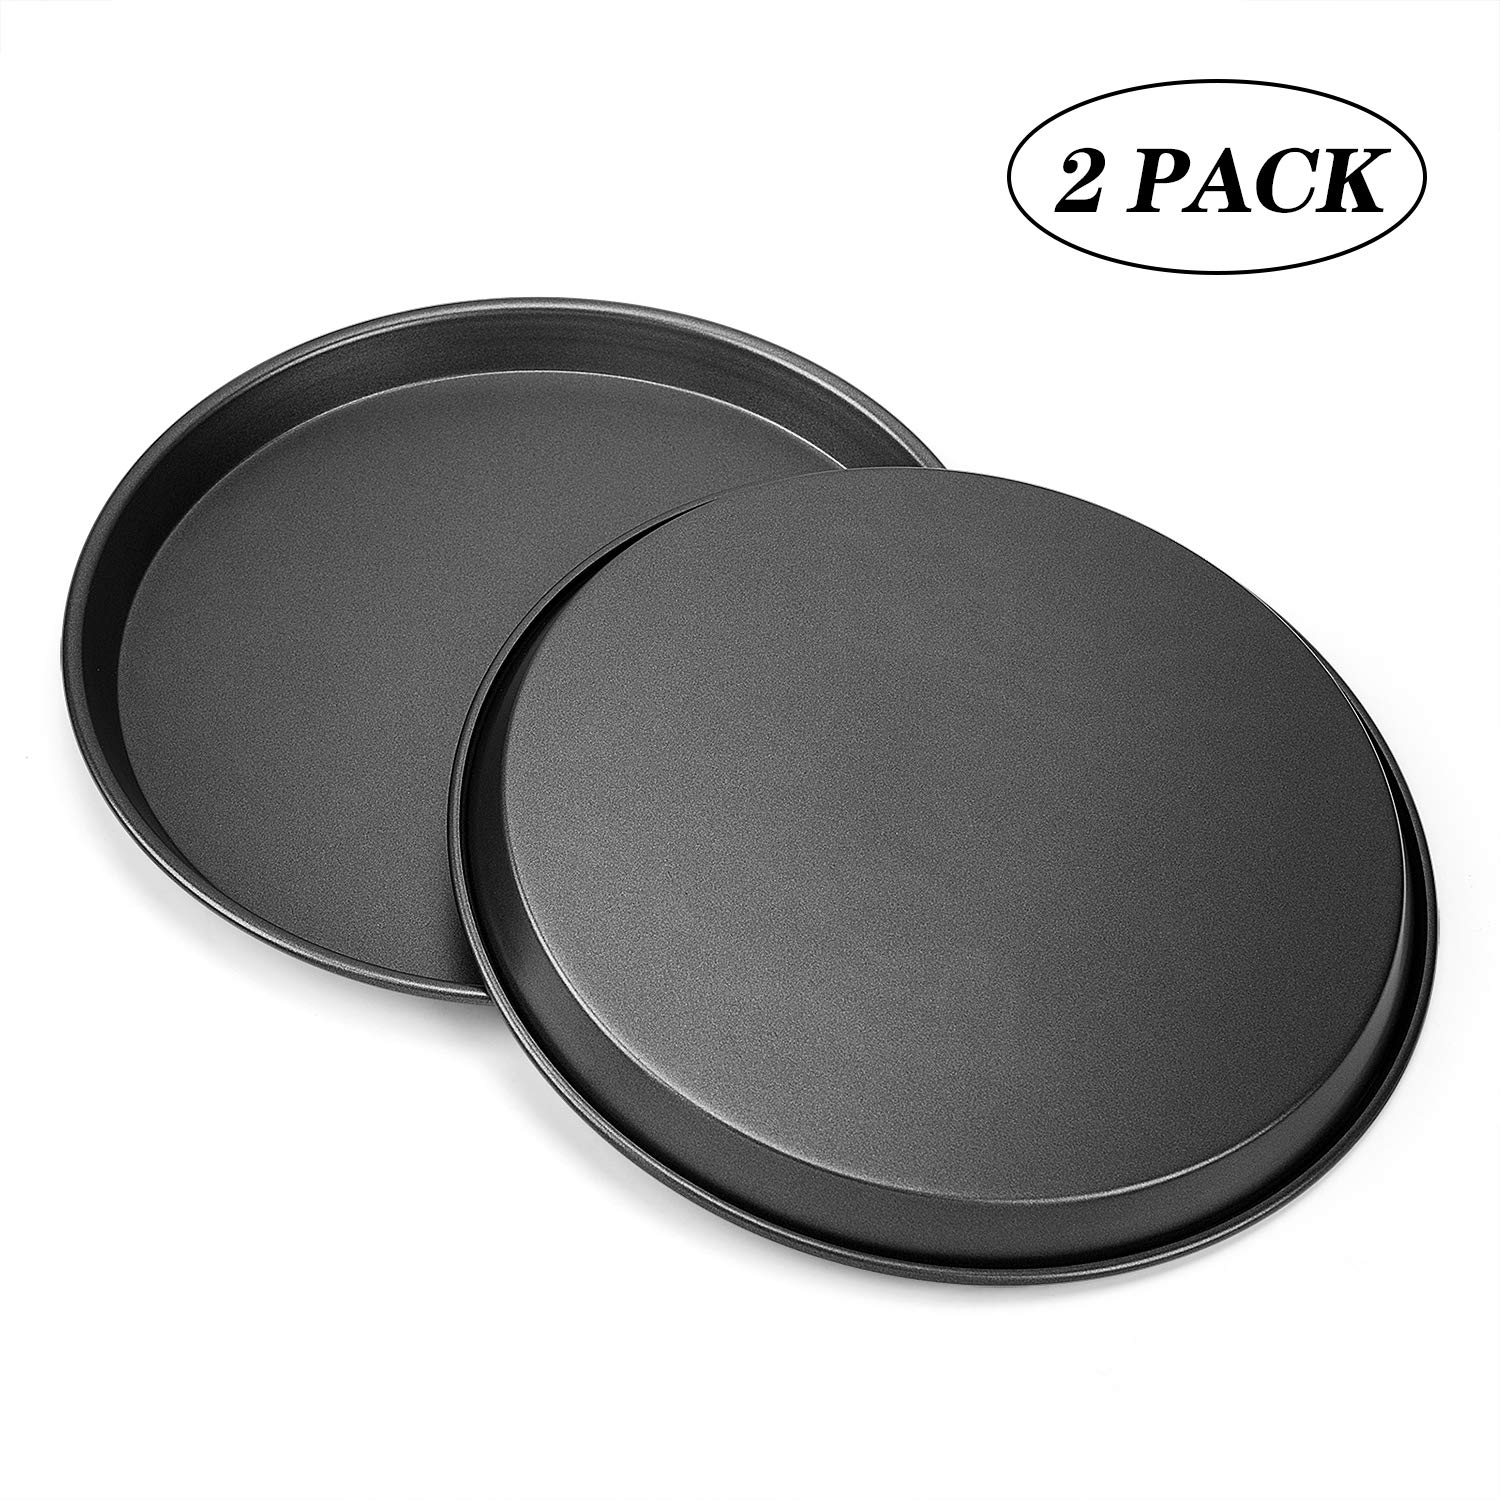 Thicken Pizza Pan 9 Inch, 2 Pack Carbon Steel Round Pizza Crisp Baking Pan 0.6mm Thickness